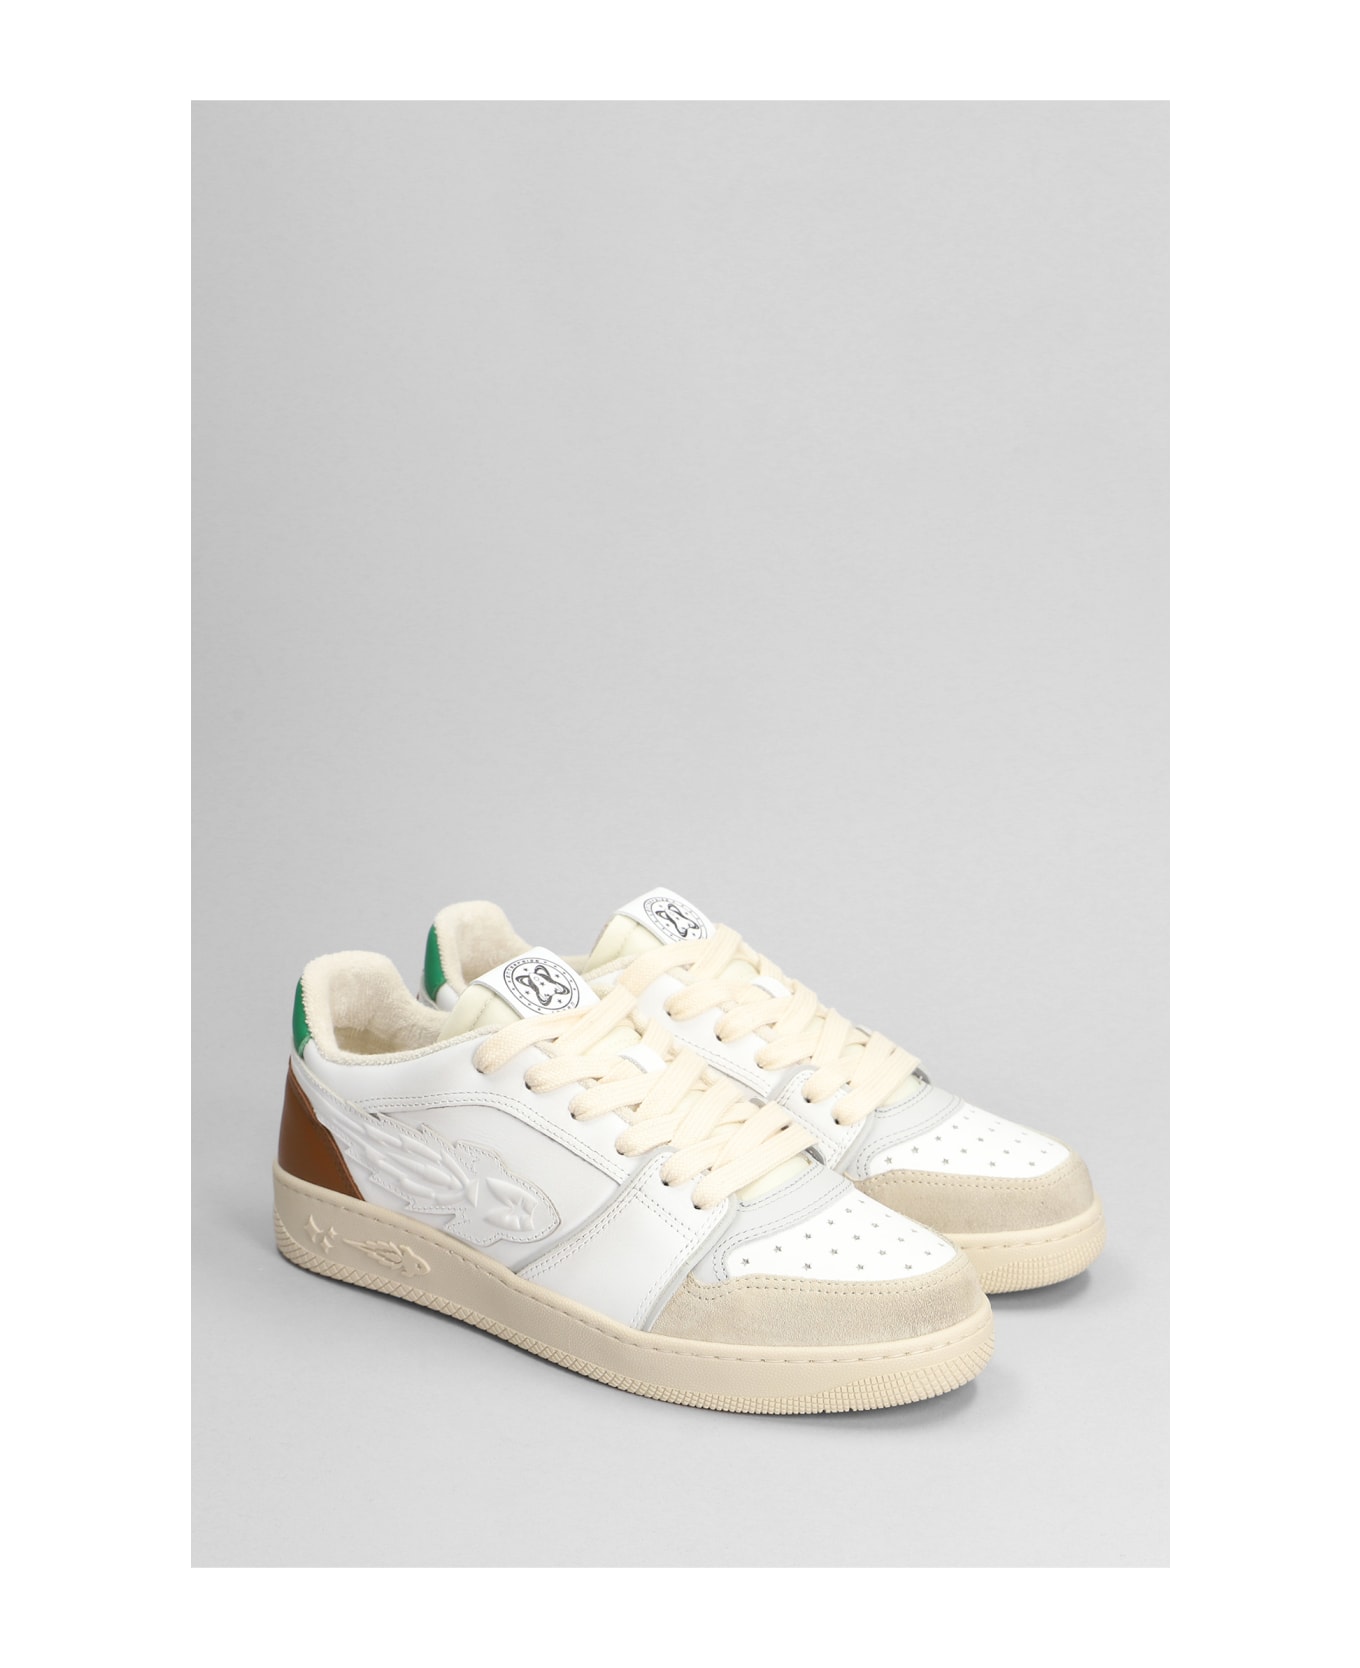 Enterprise Japan Sneakers In White Suede And Leather - white スニーカー